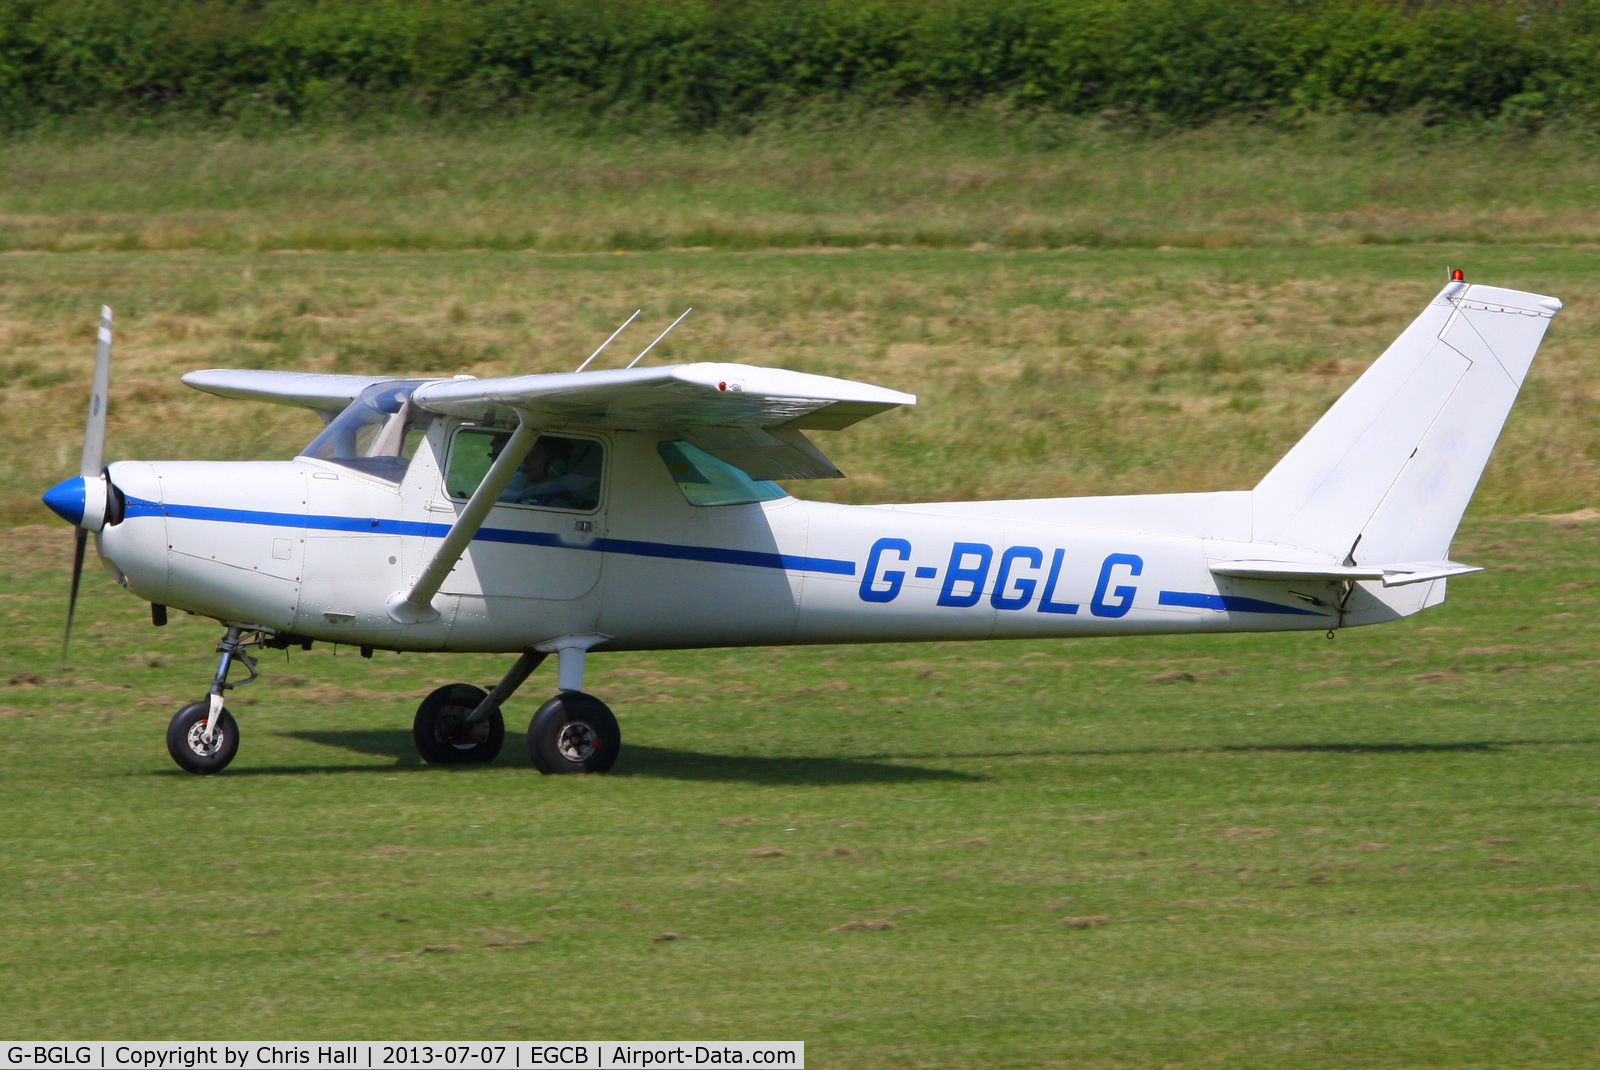 G-BGLG, 1978 Cessna 152 C/N 152-82092, at the Barton open day and fly in